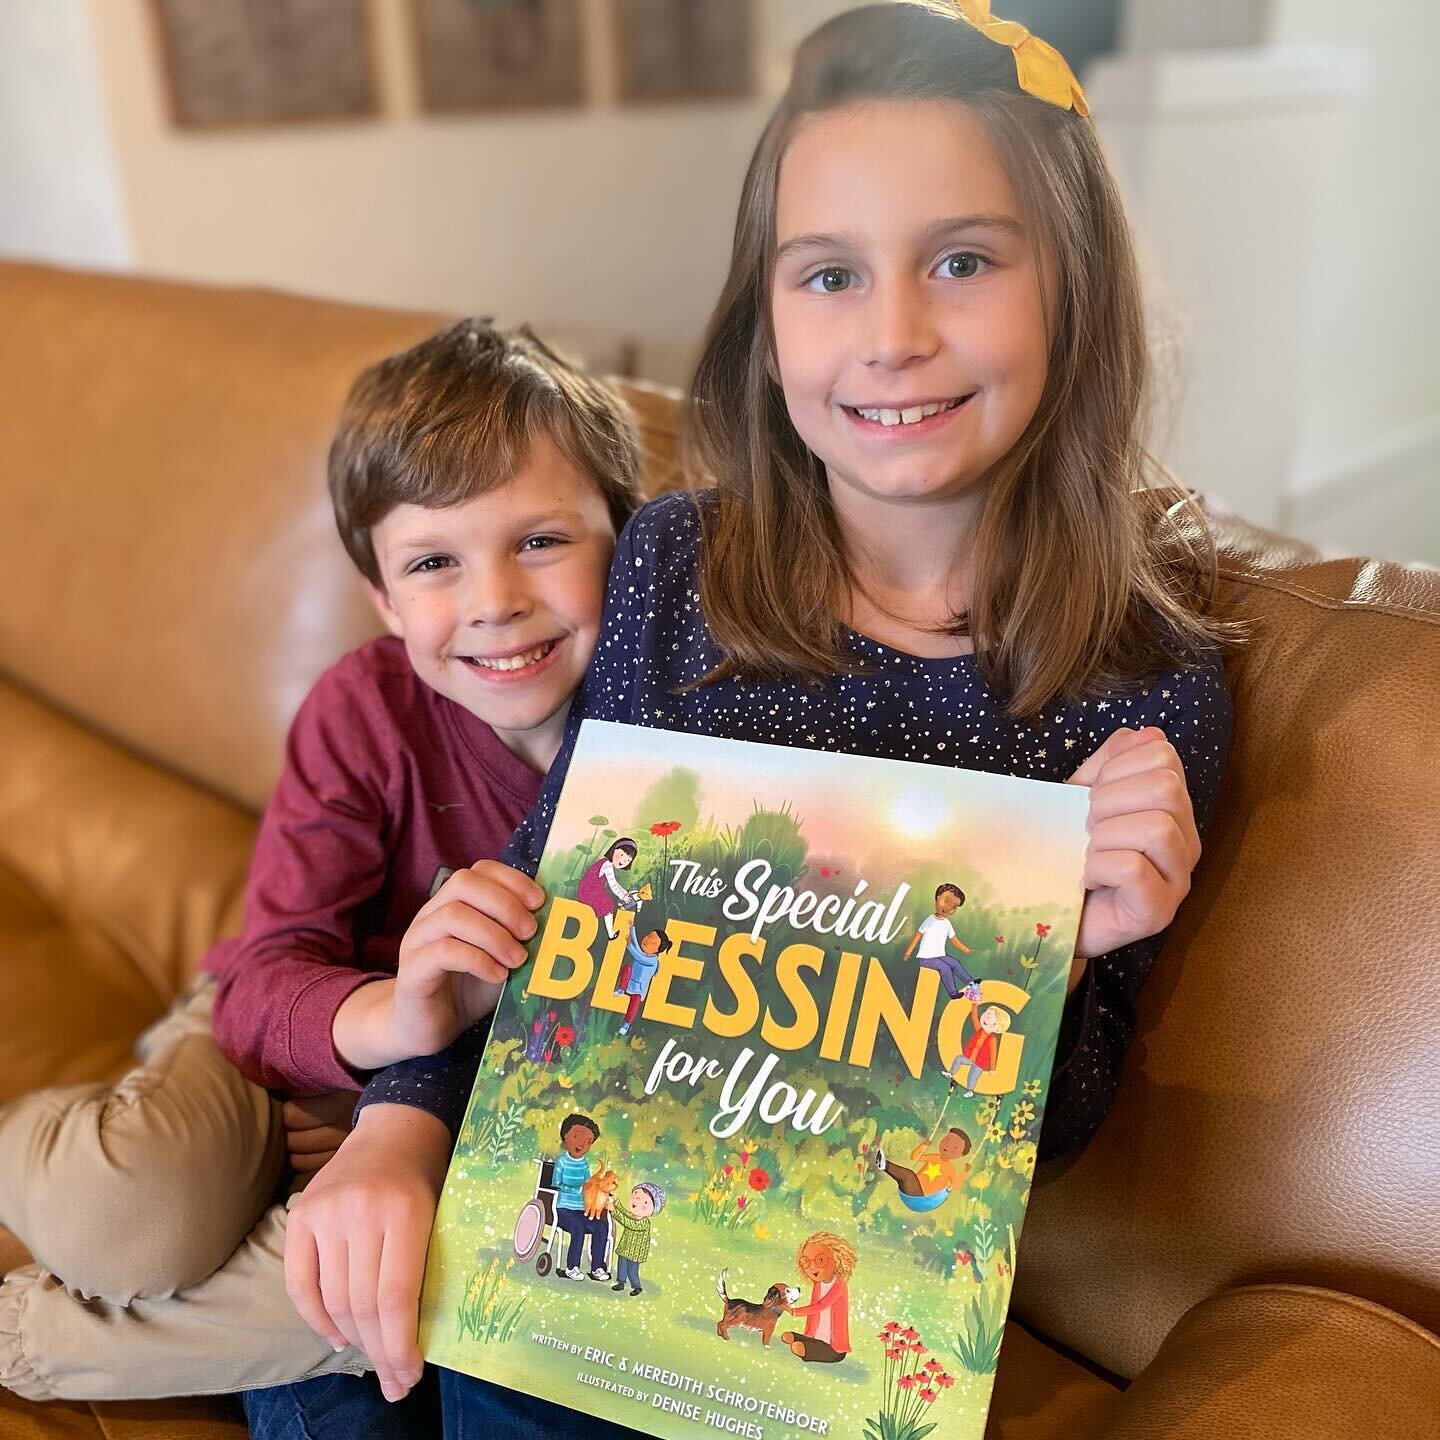 Friends! This Special Blessing For You releases tomorrow! We are so excited and can't wait for you to get your copy! Our hope is this book is a resource for you to use to speak a blessing over the children in your lives! 

Order link in bio! 

#zonde